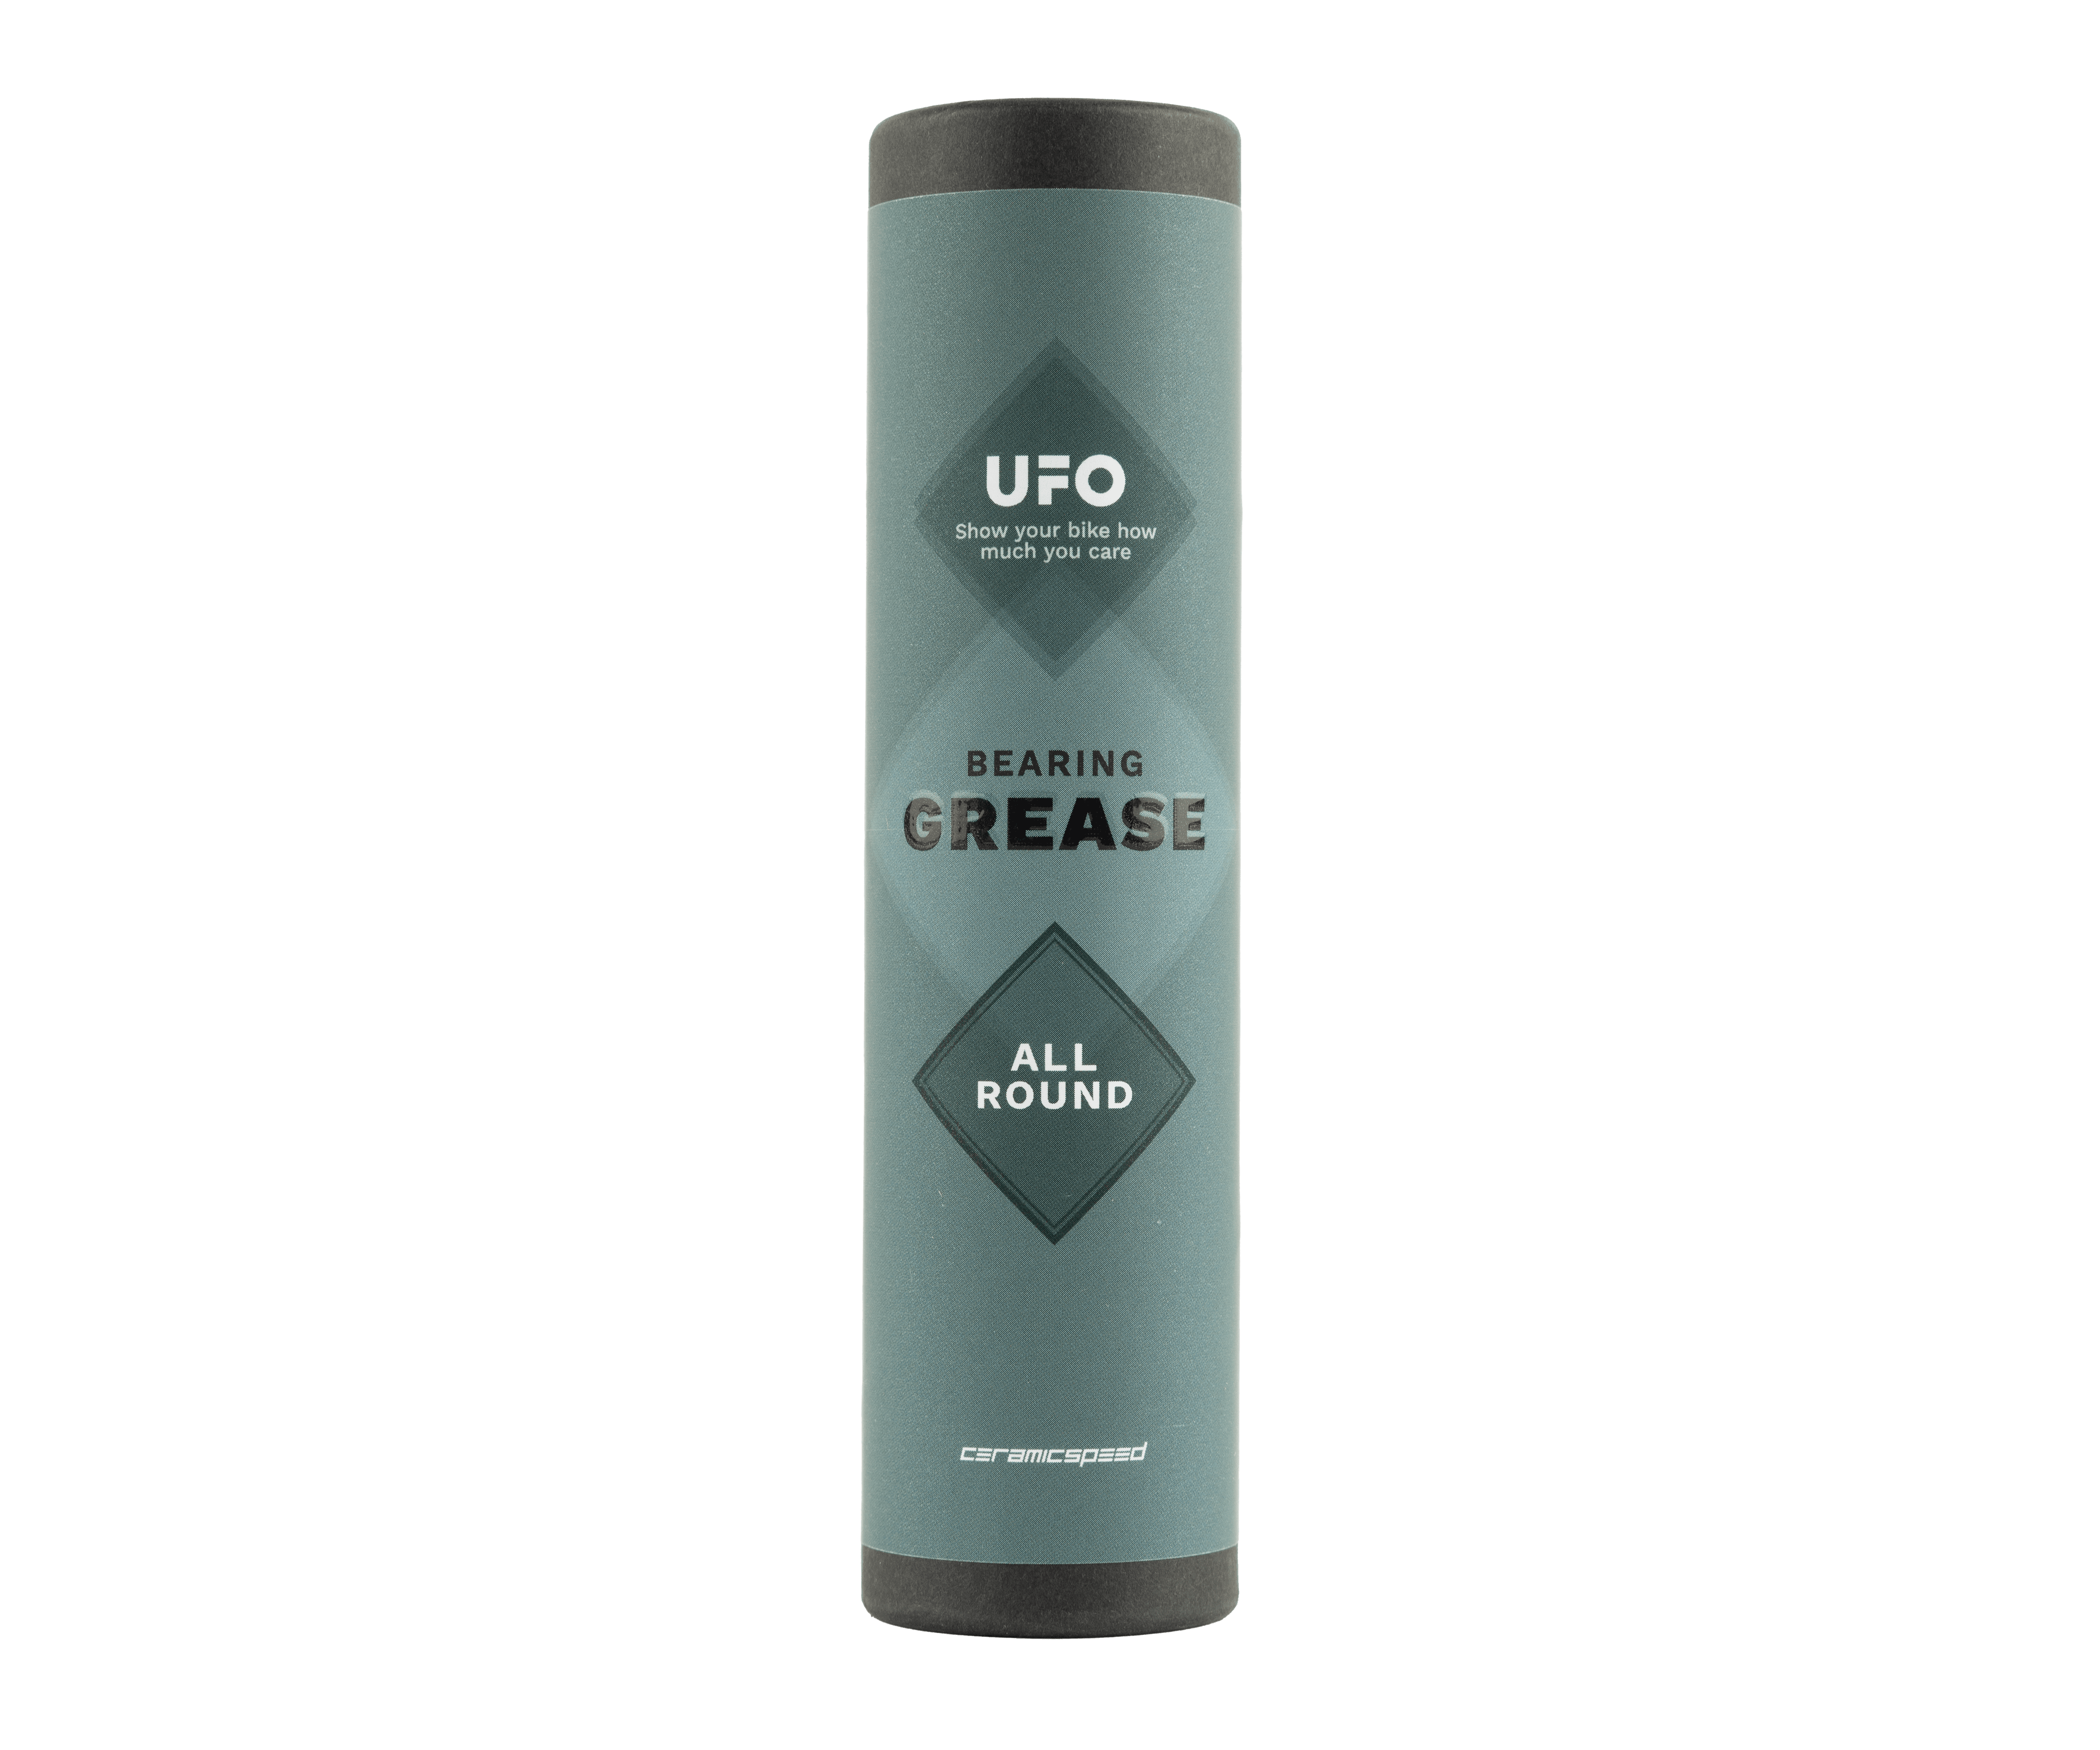 UFO Bearings All Round Grease